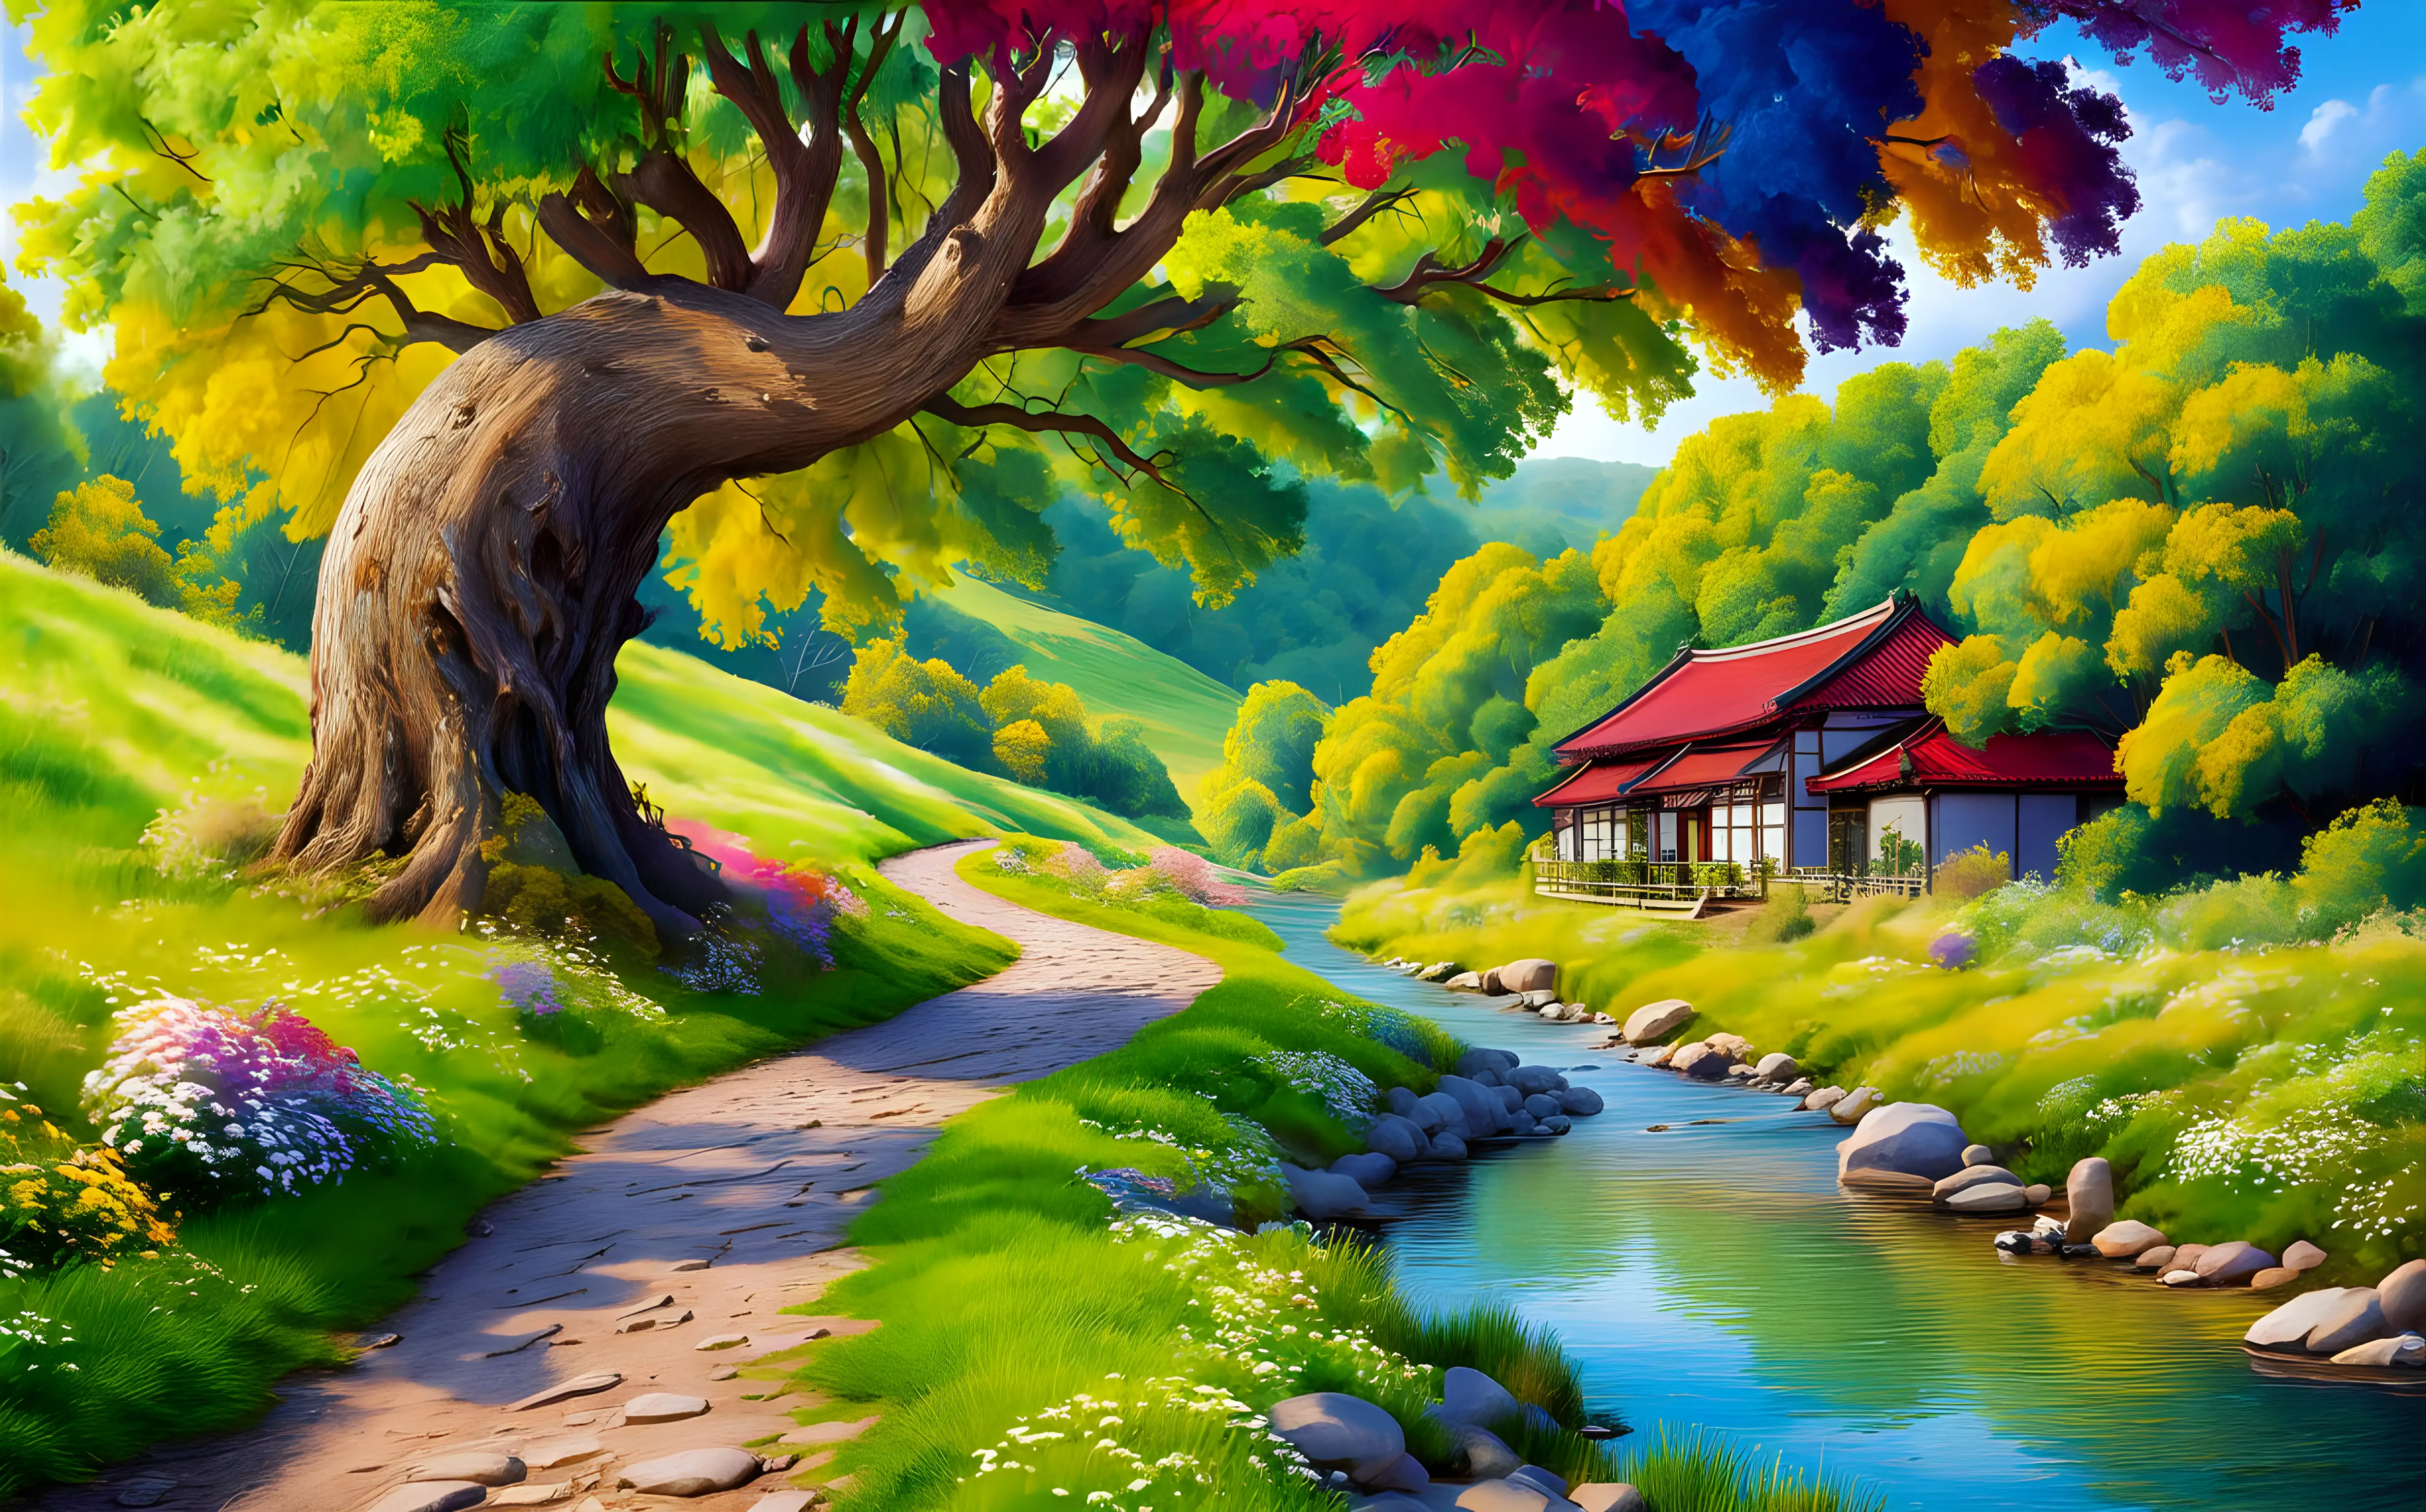 Tranquil Countryside Scene with Colorful Flowers Towering Trees and Charming Riverbank House